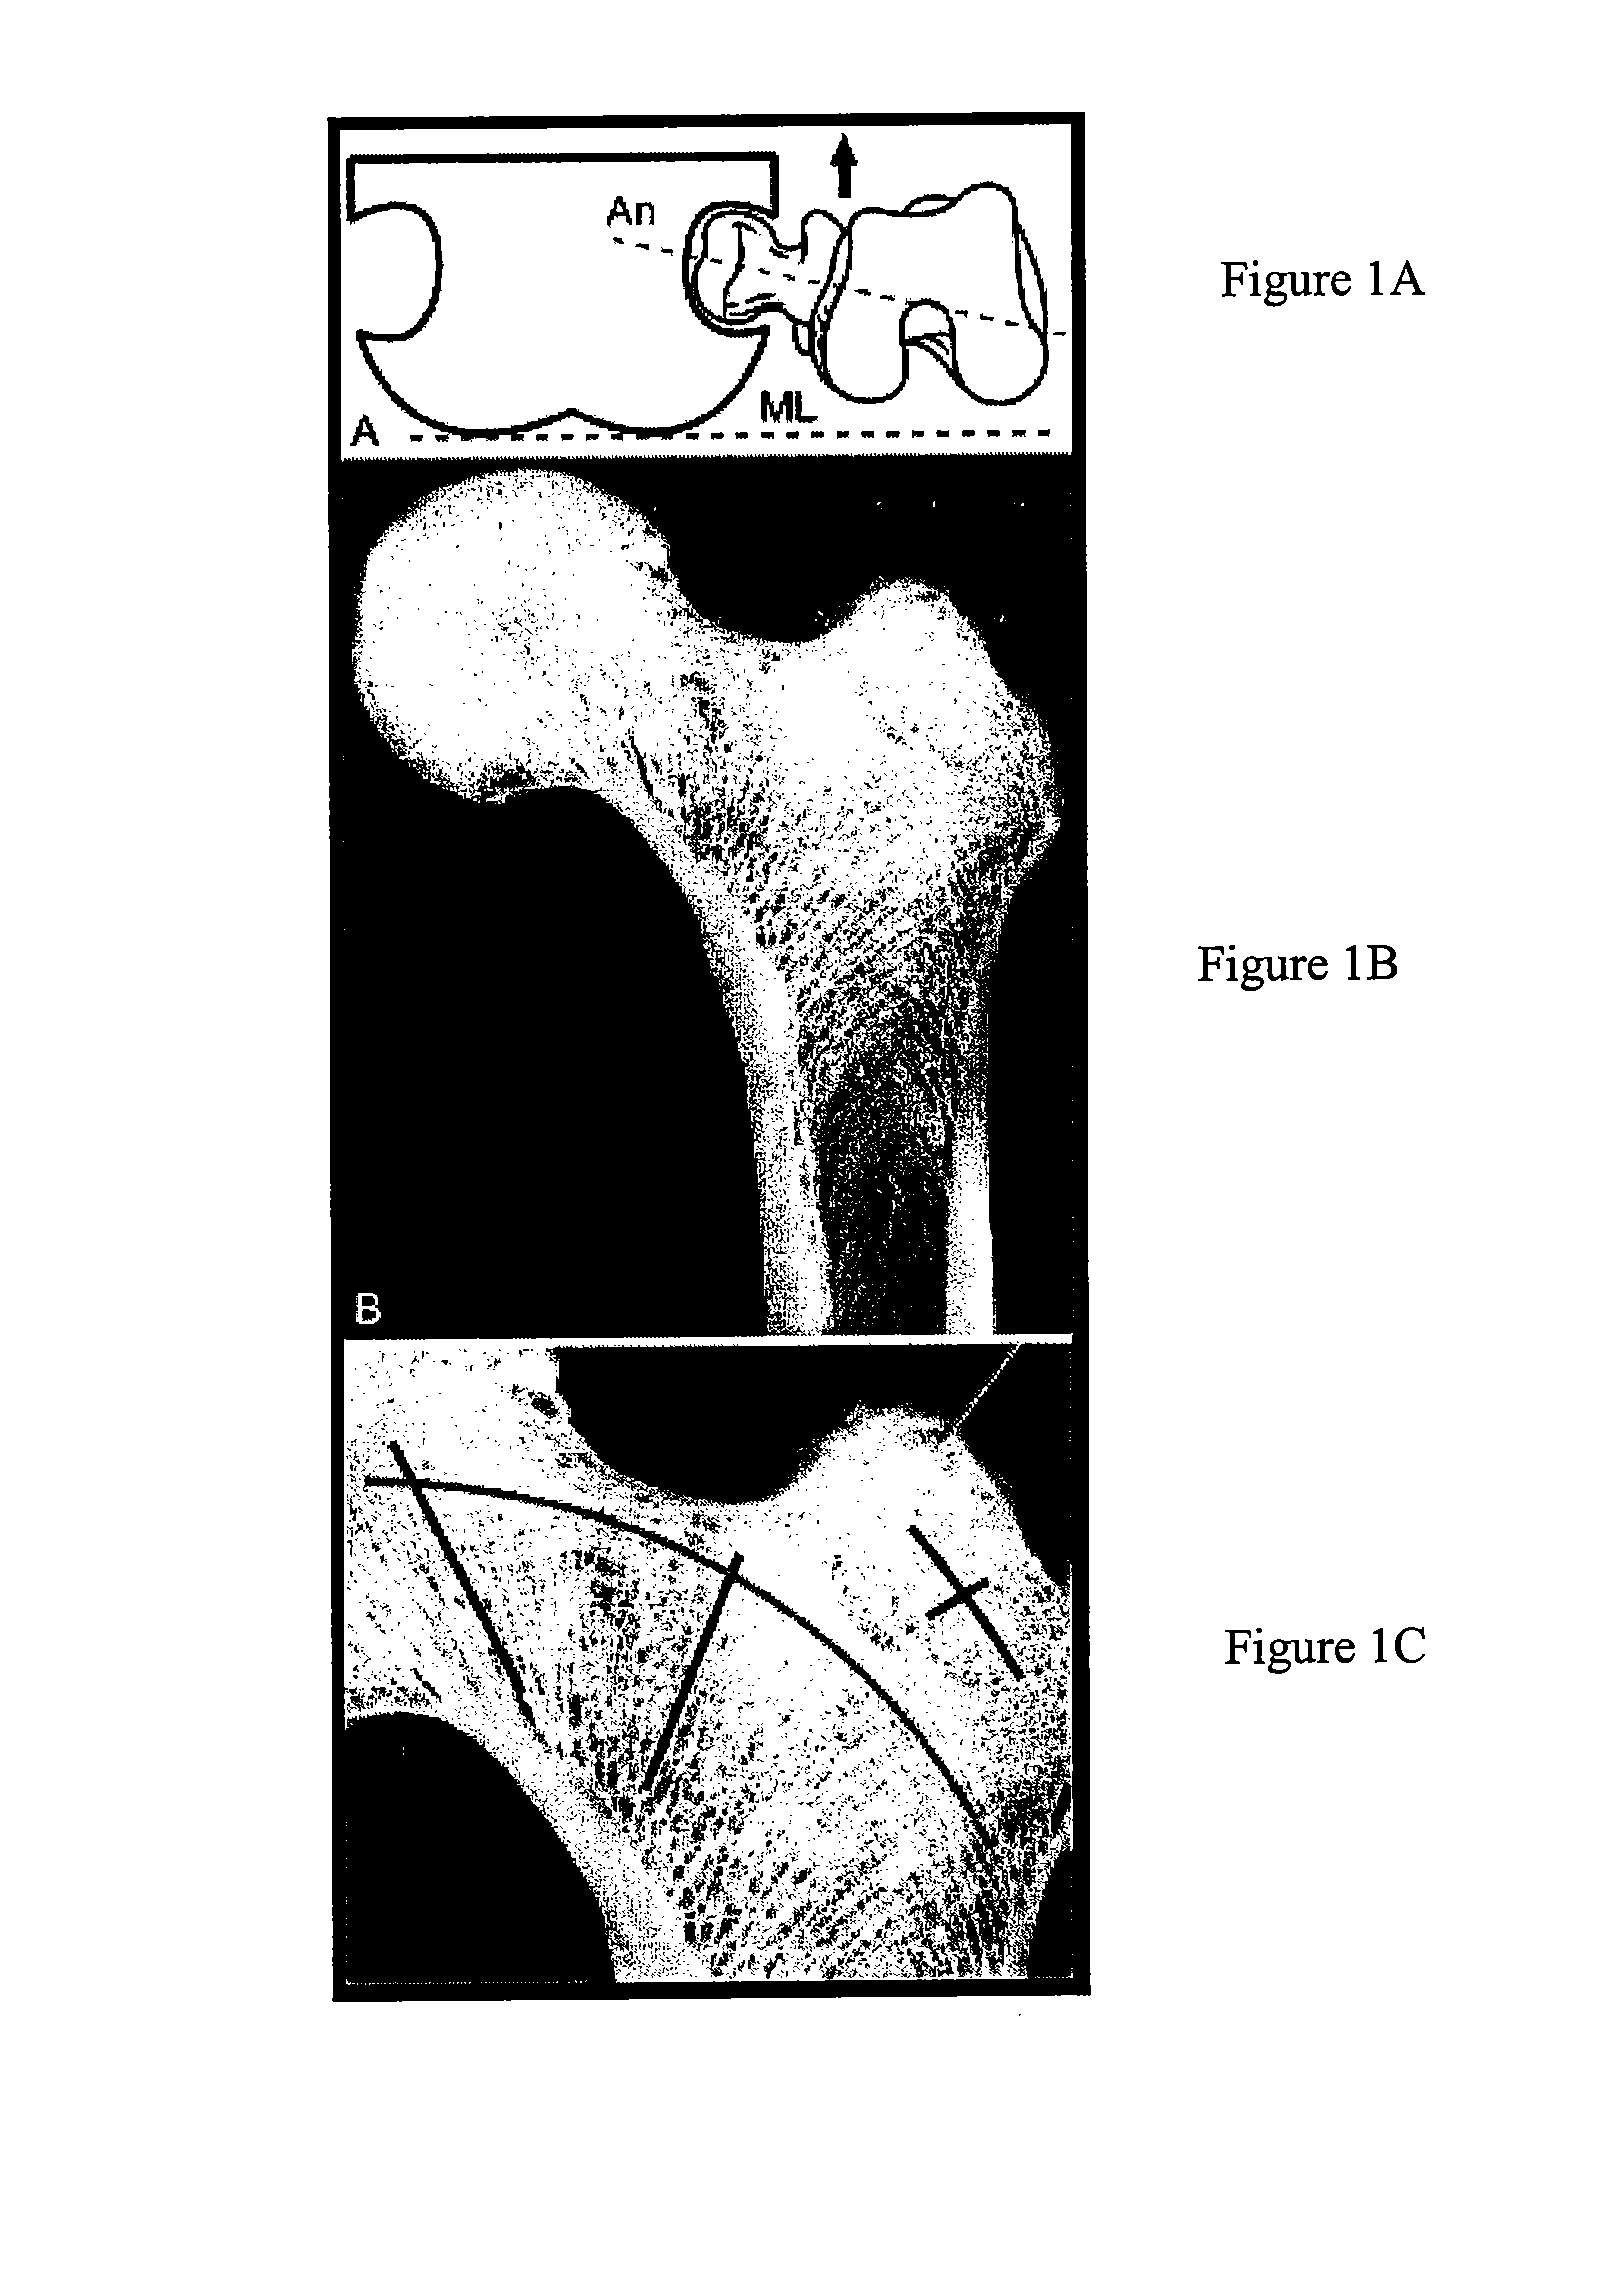 Templates for assessing bone quality and methods of use thereof